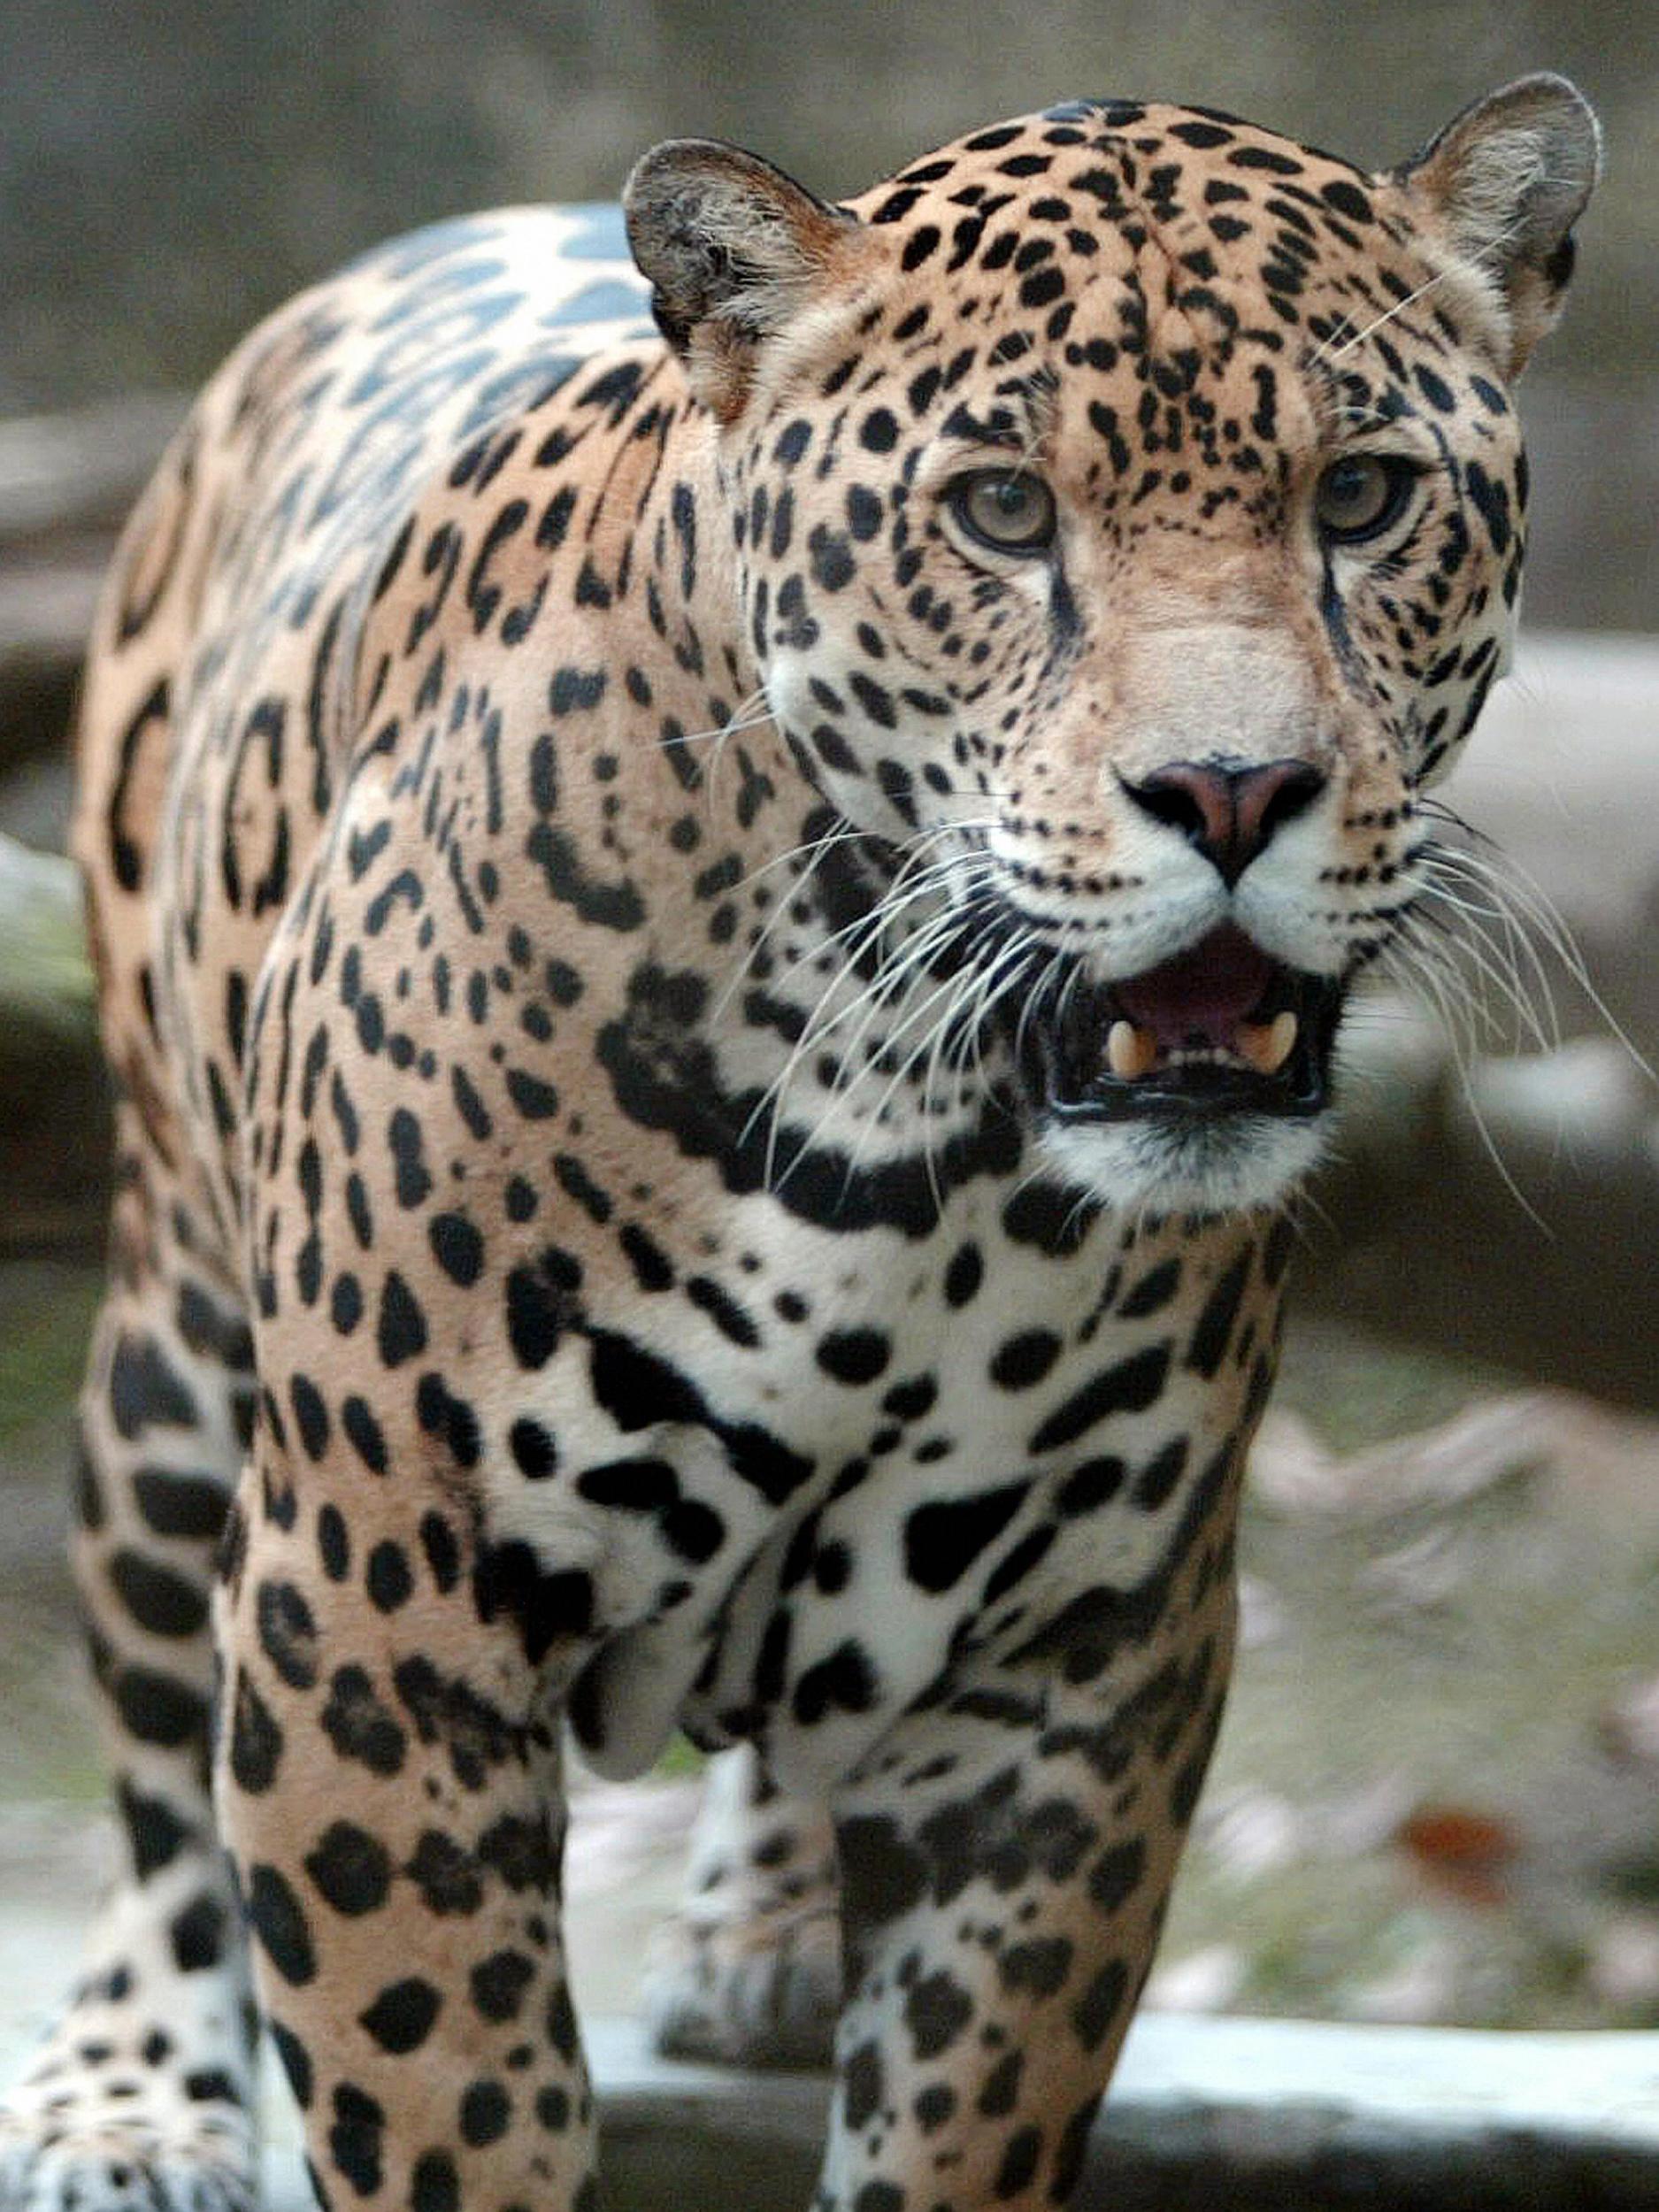 Changing our spots: if we don't change our diets then animals, such as jaguar, face extinction